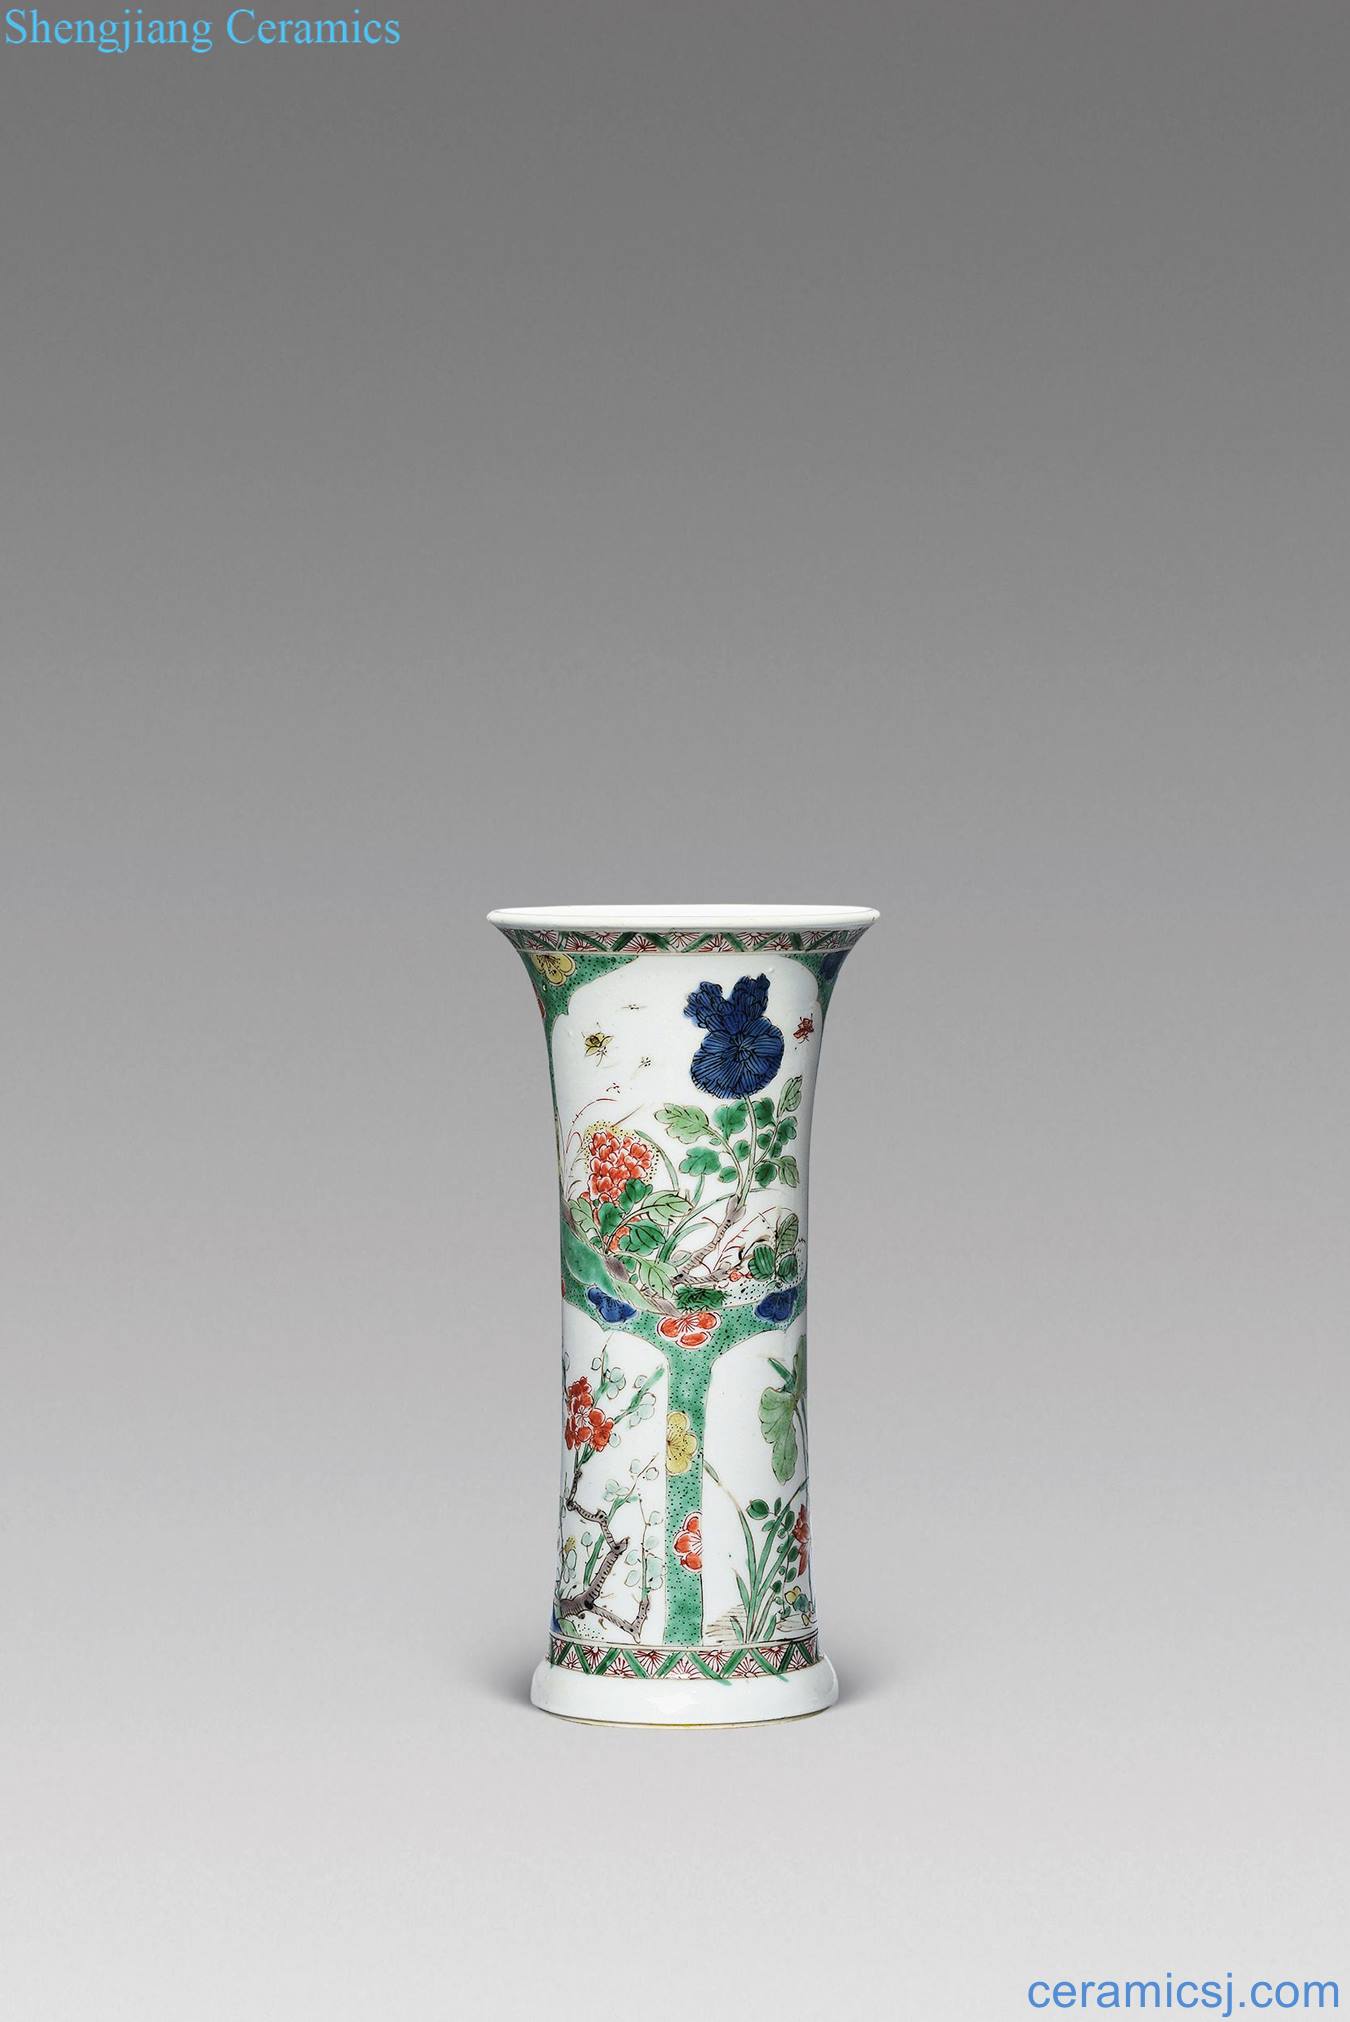 The qing emperor kangxi Colorful flower vase with flowers